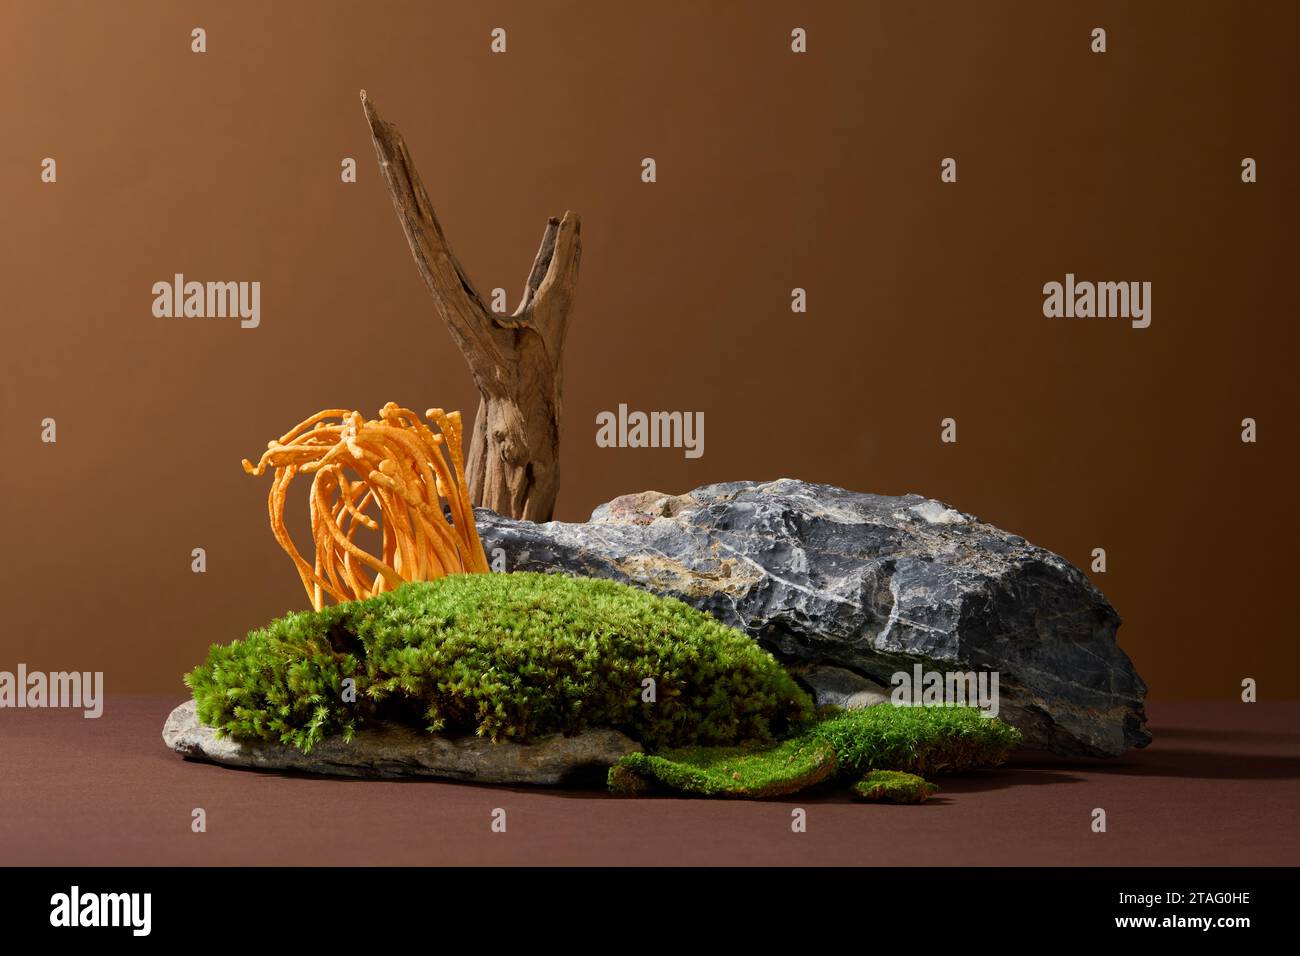 Scene depicting cordyceps mushrooms and green moss growing on rocks on a brown background. Cordyceps is a parasitic fungus that grows on caterpillar l Stock Photo